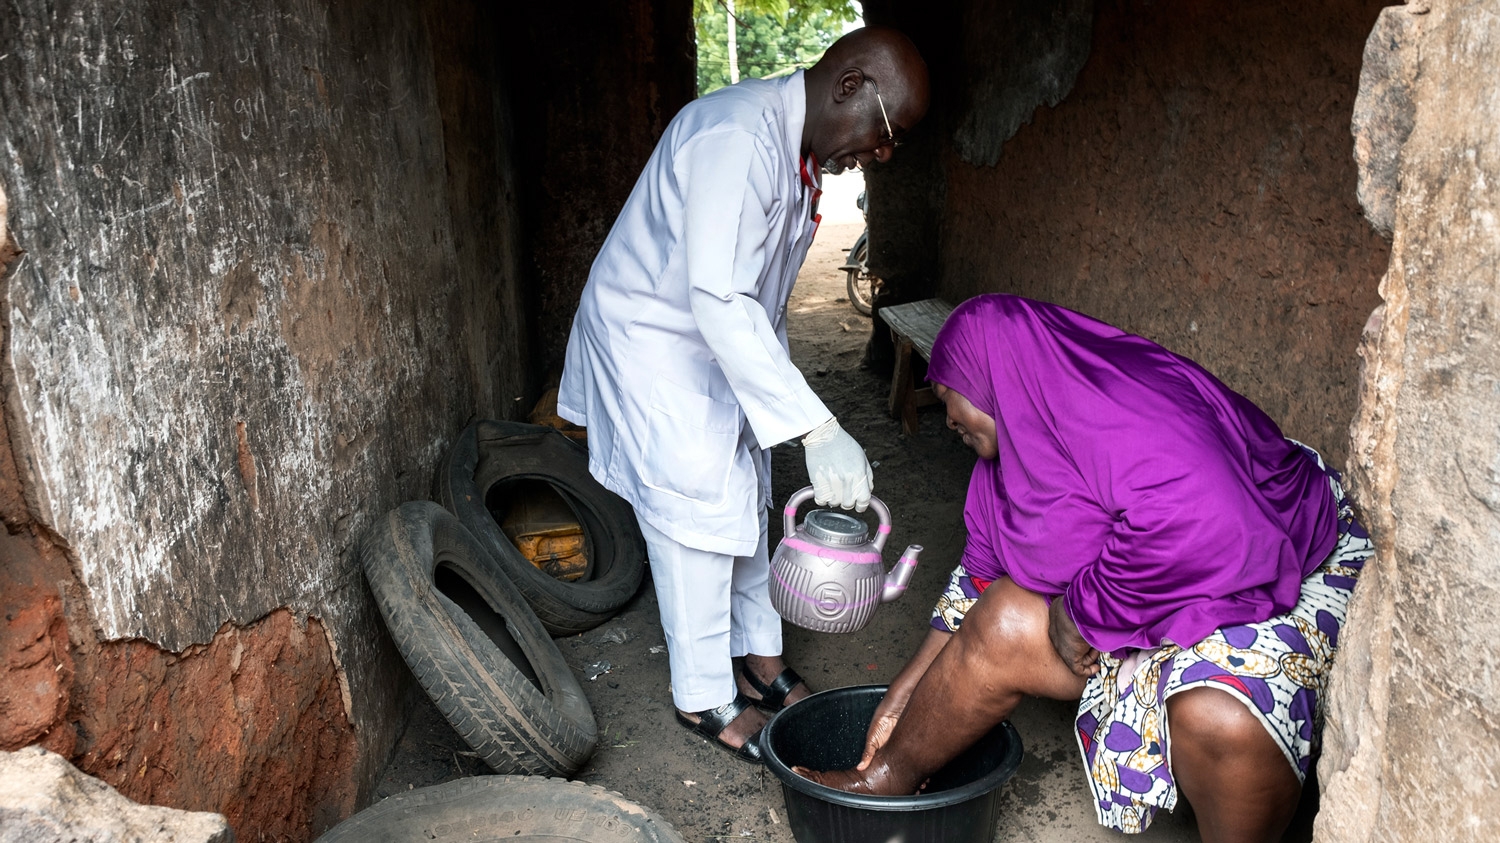 A health worker helps a woman wash her leg, which has been affected by lymphoedema.